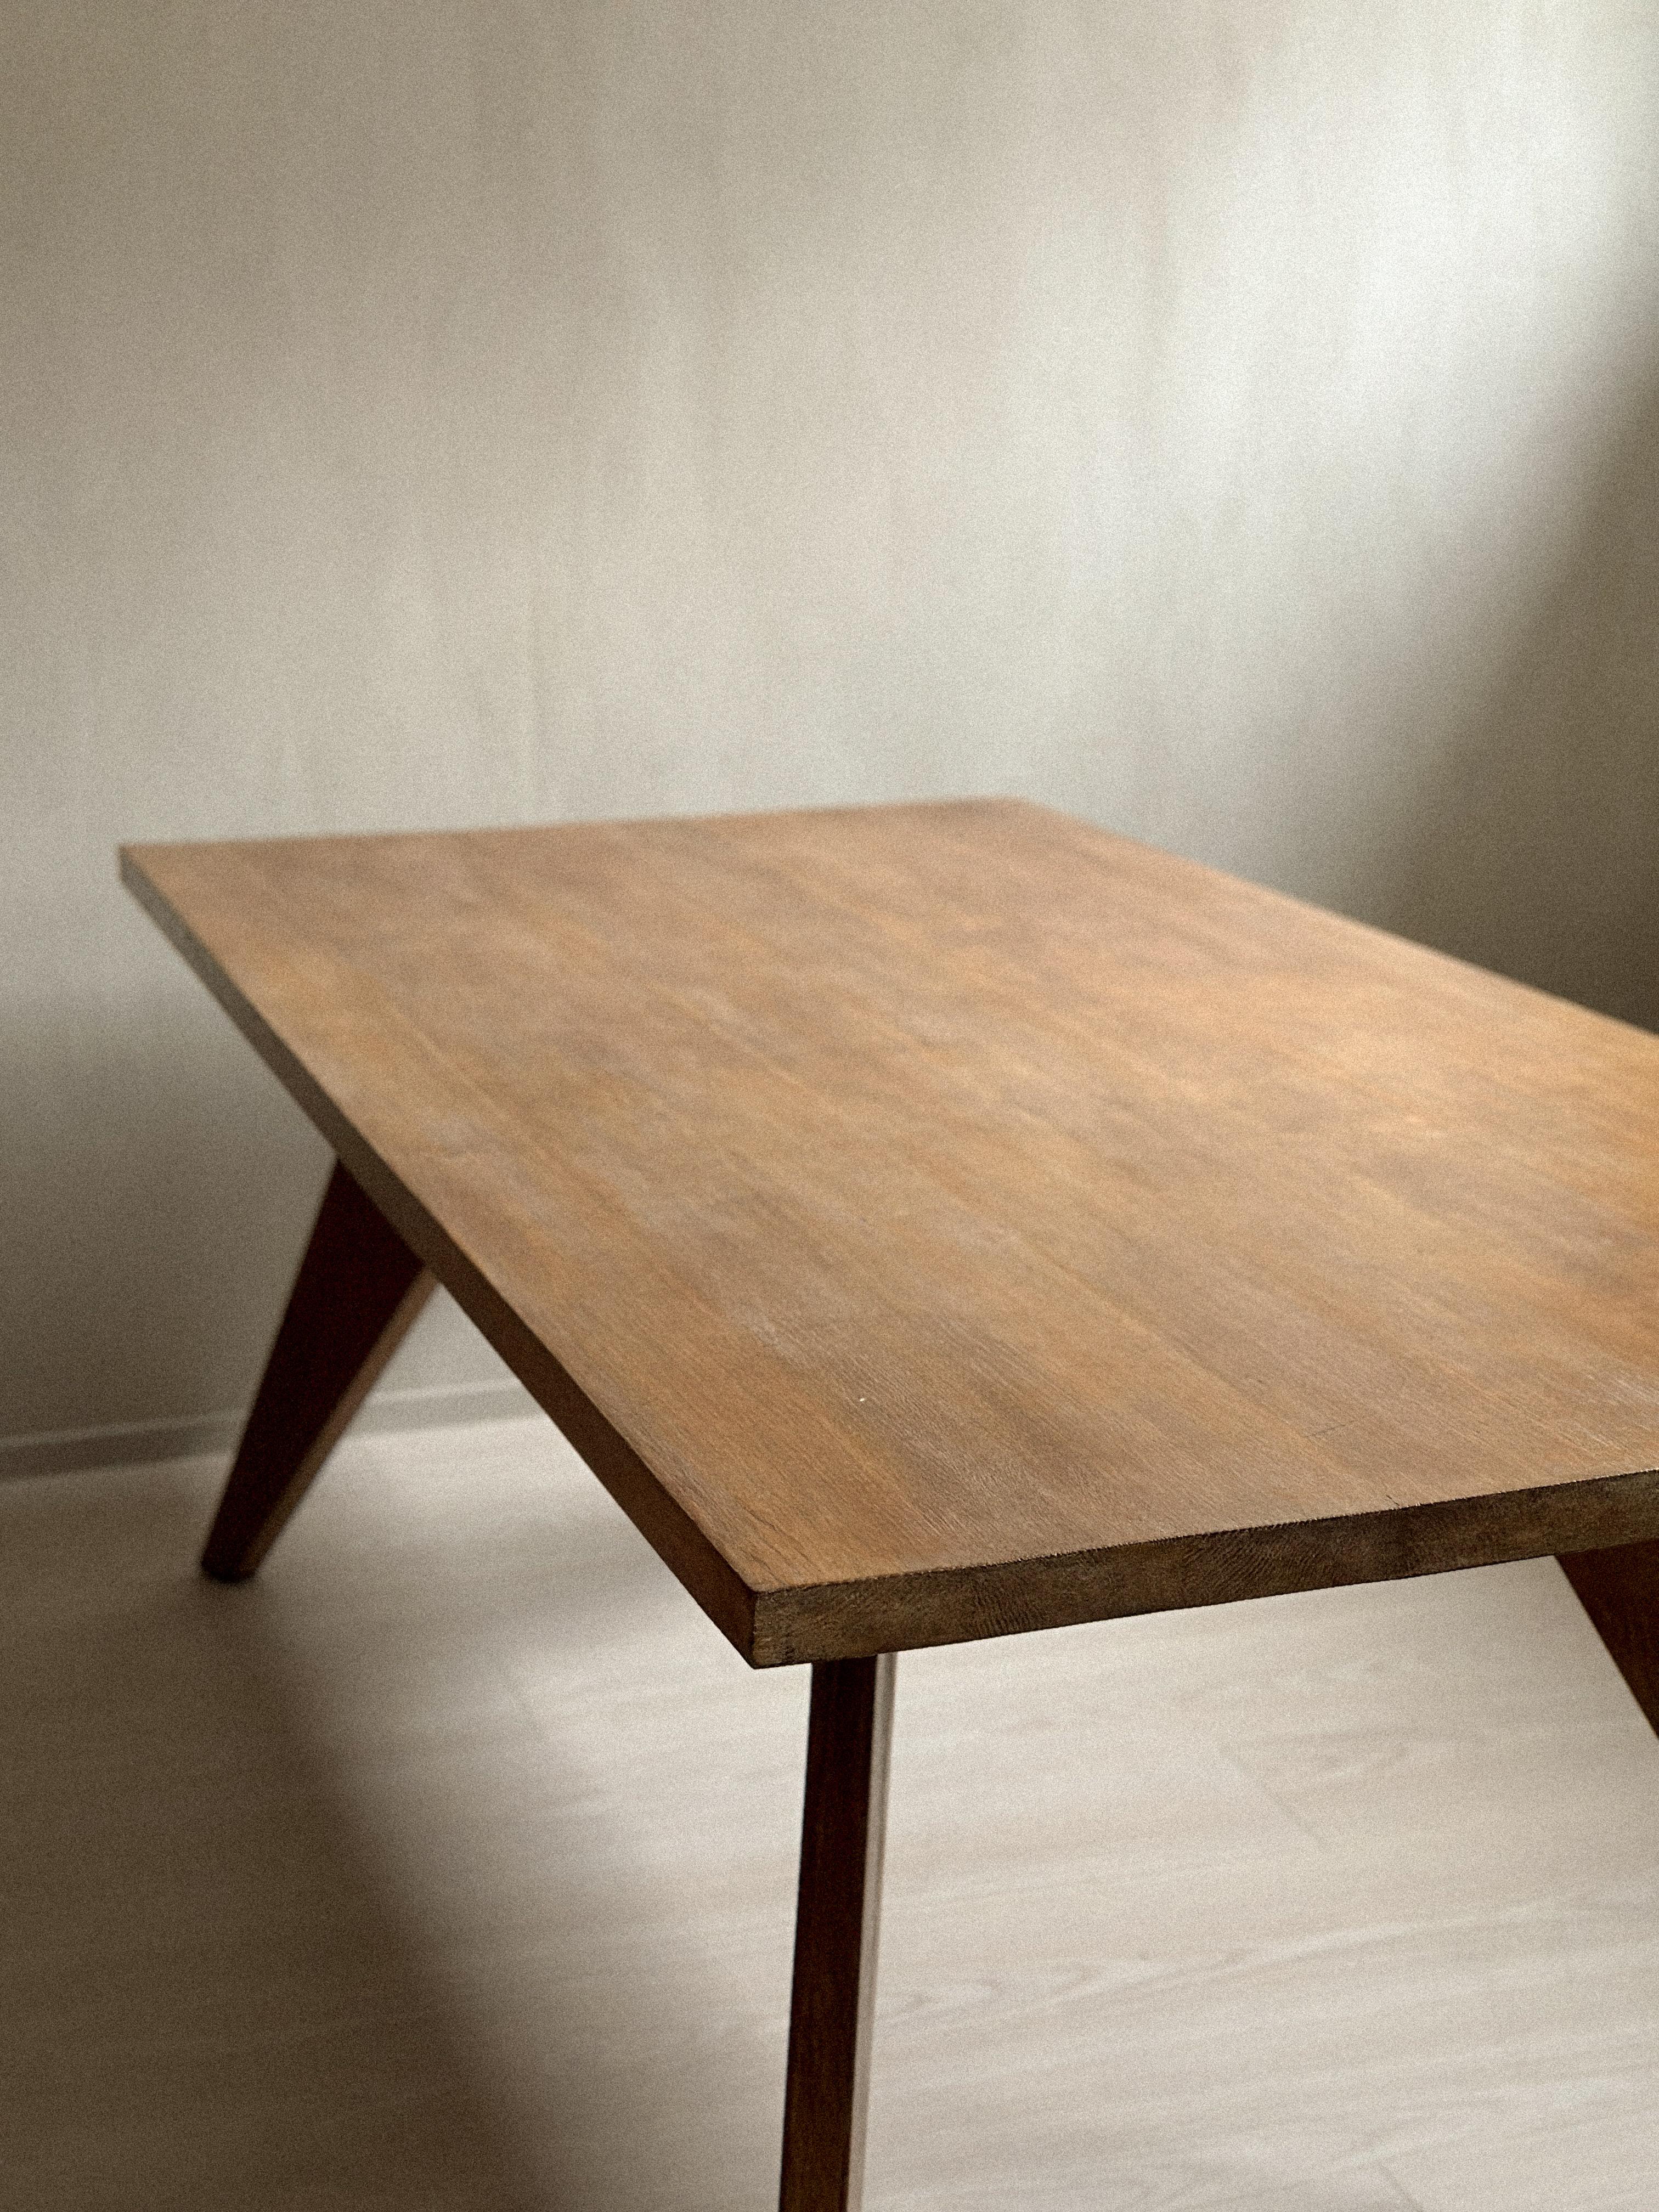 Steel Dining Table in style of Jean Prouvé 